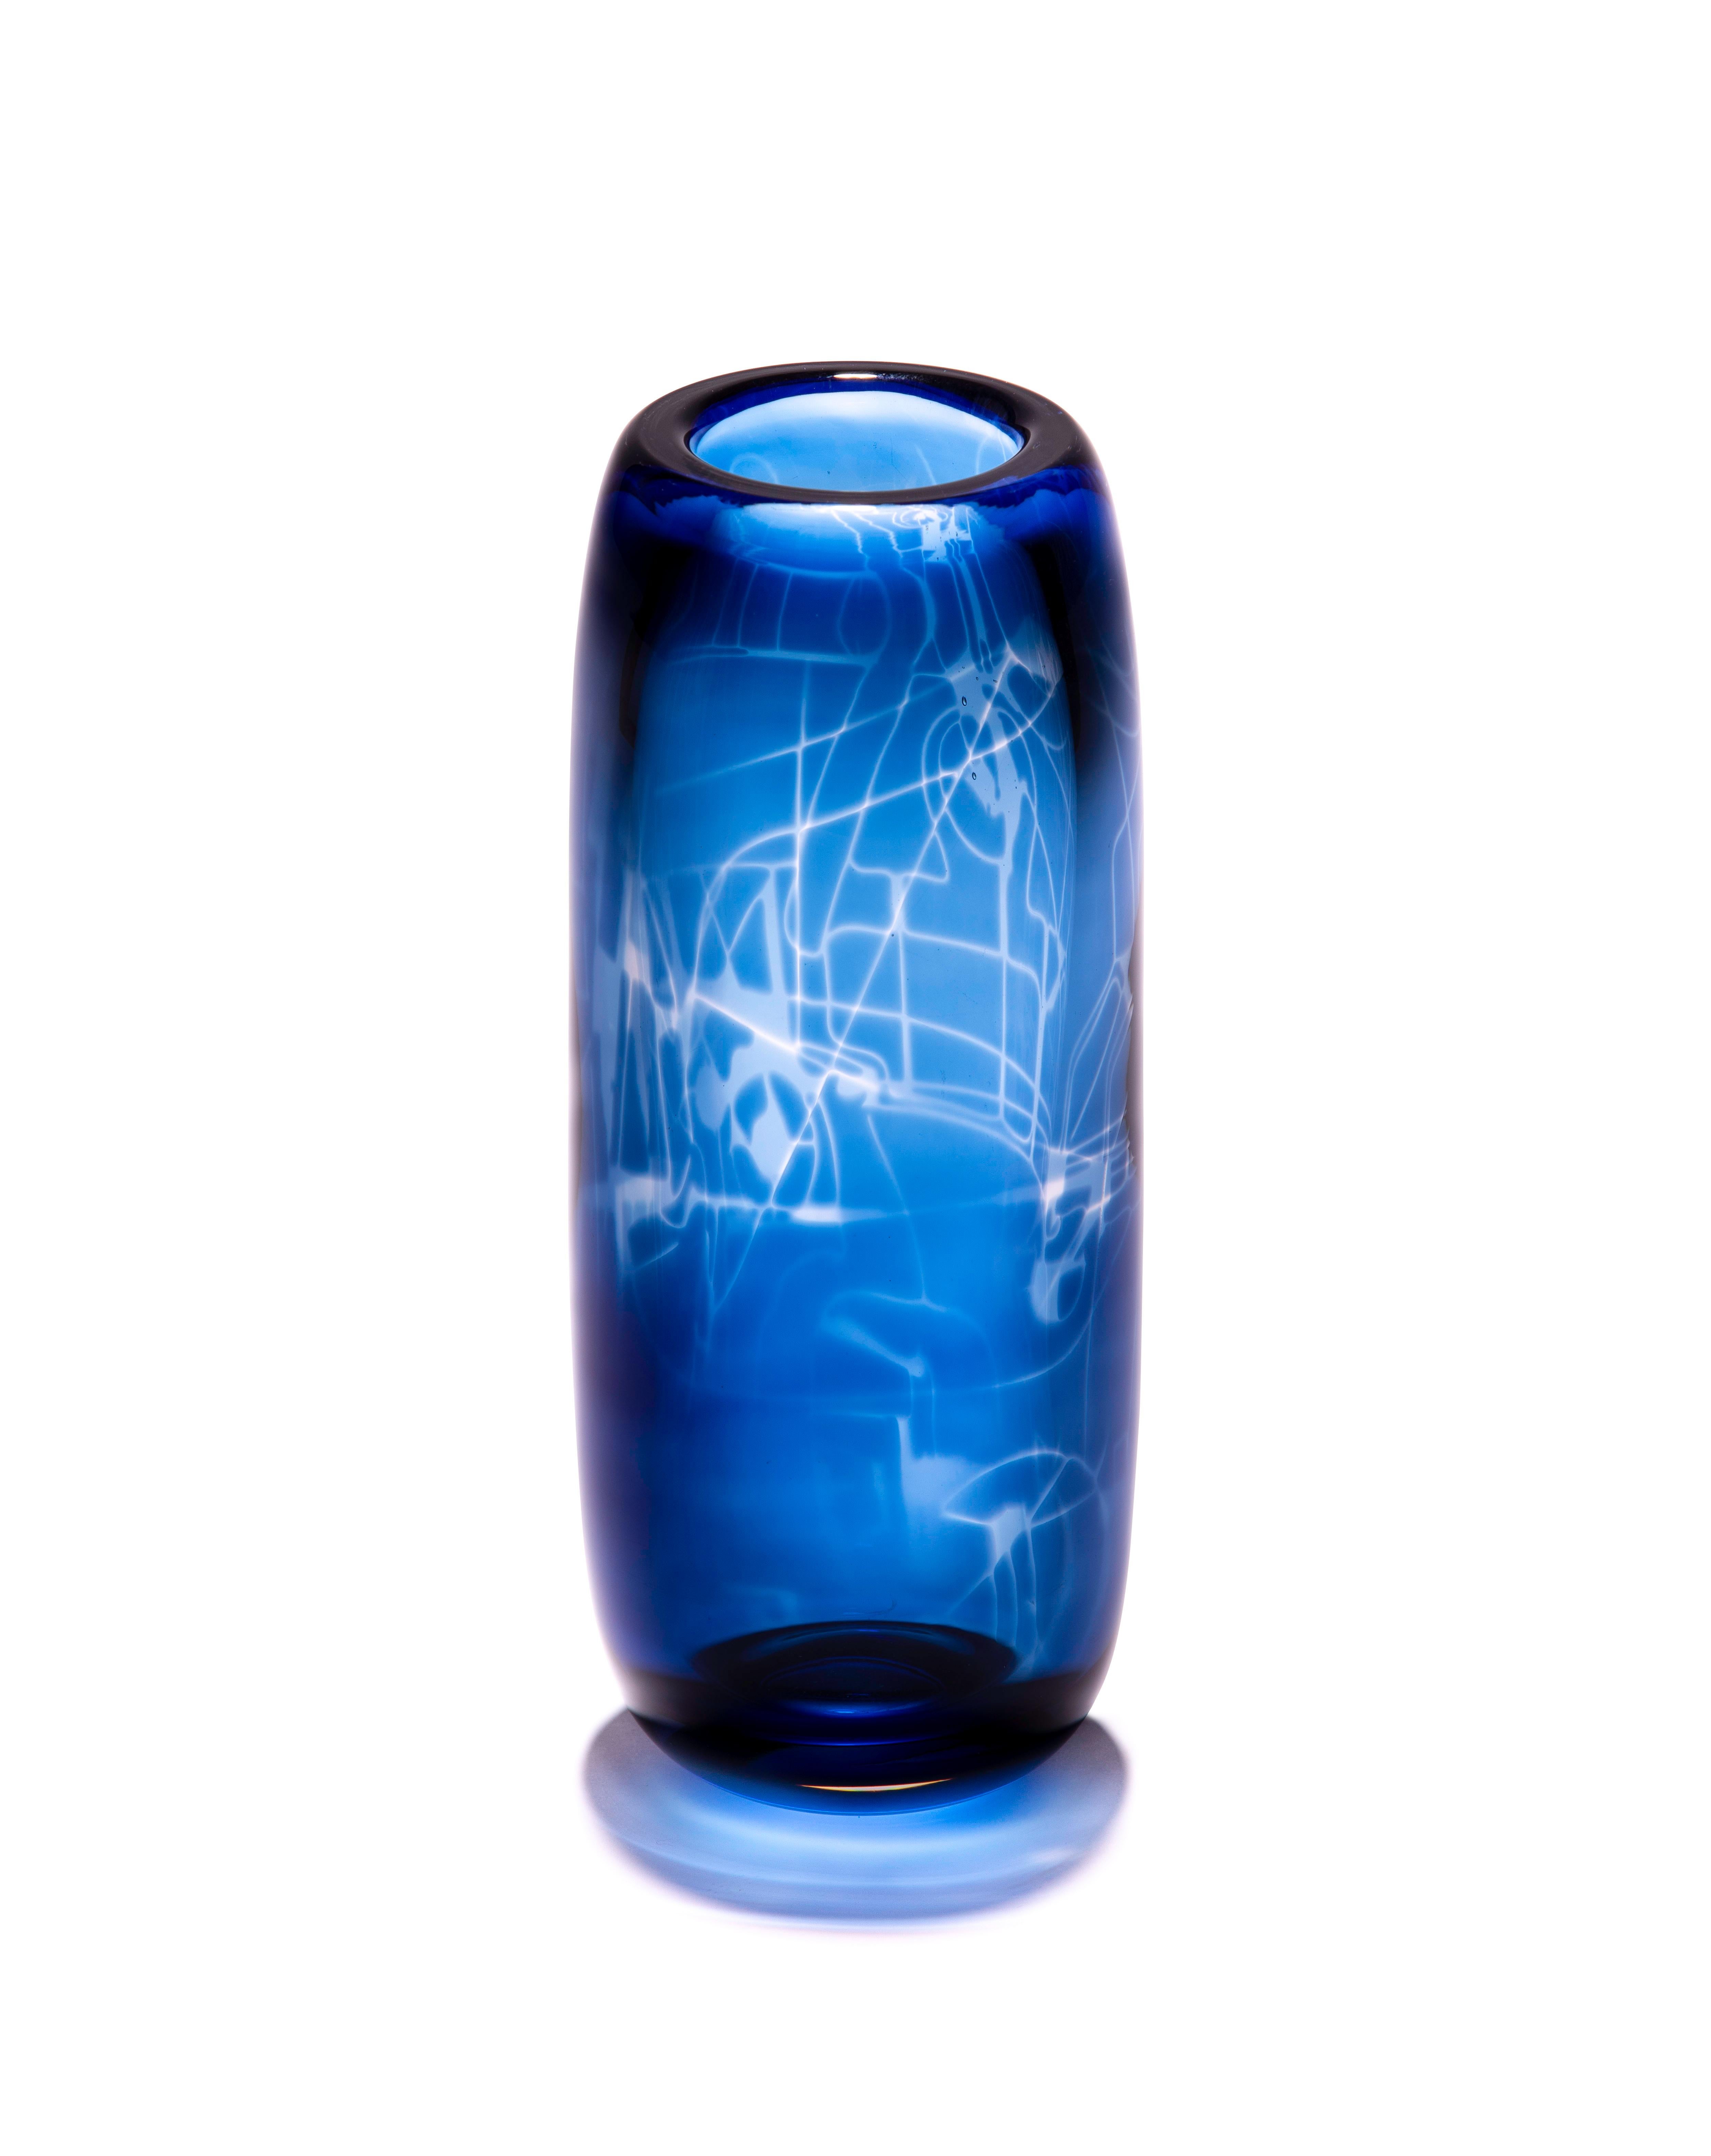 Unique Harvest Graal Blue and Black Glass Vase by Tiina Sarapu For Sale 9